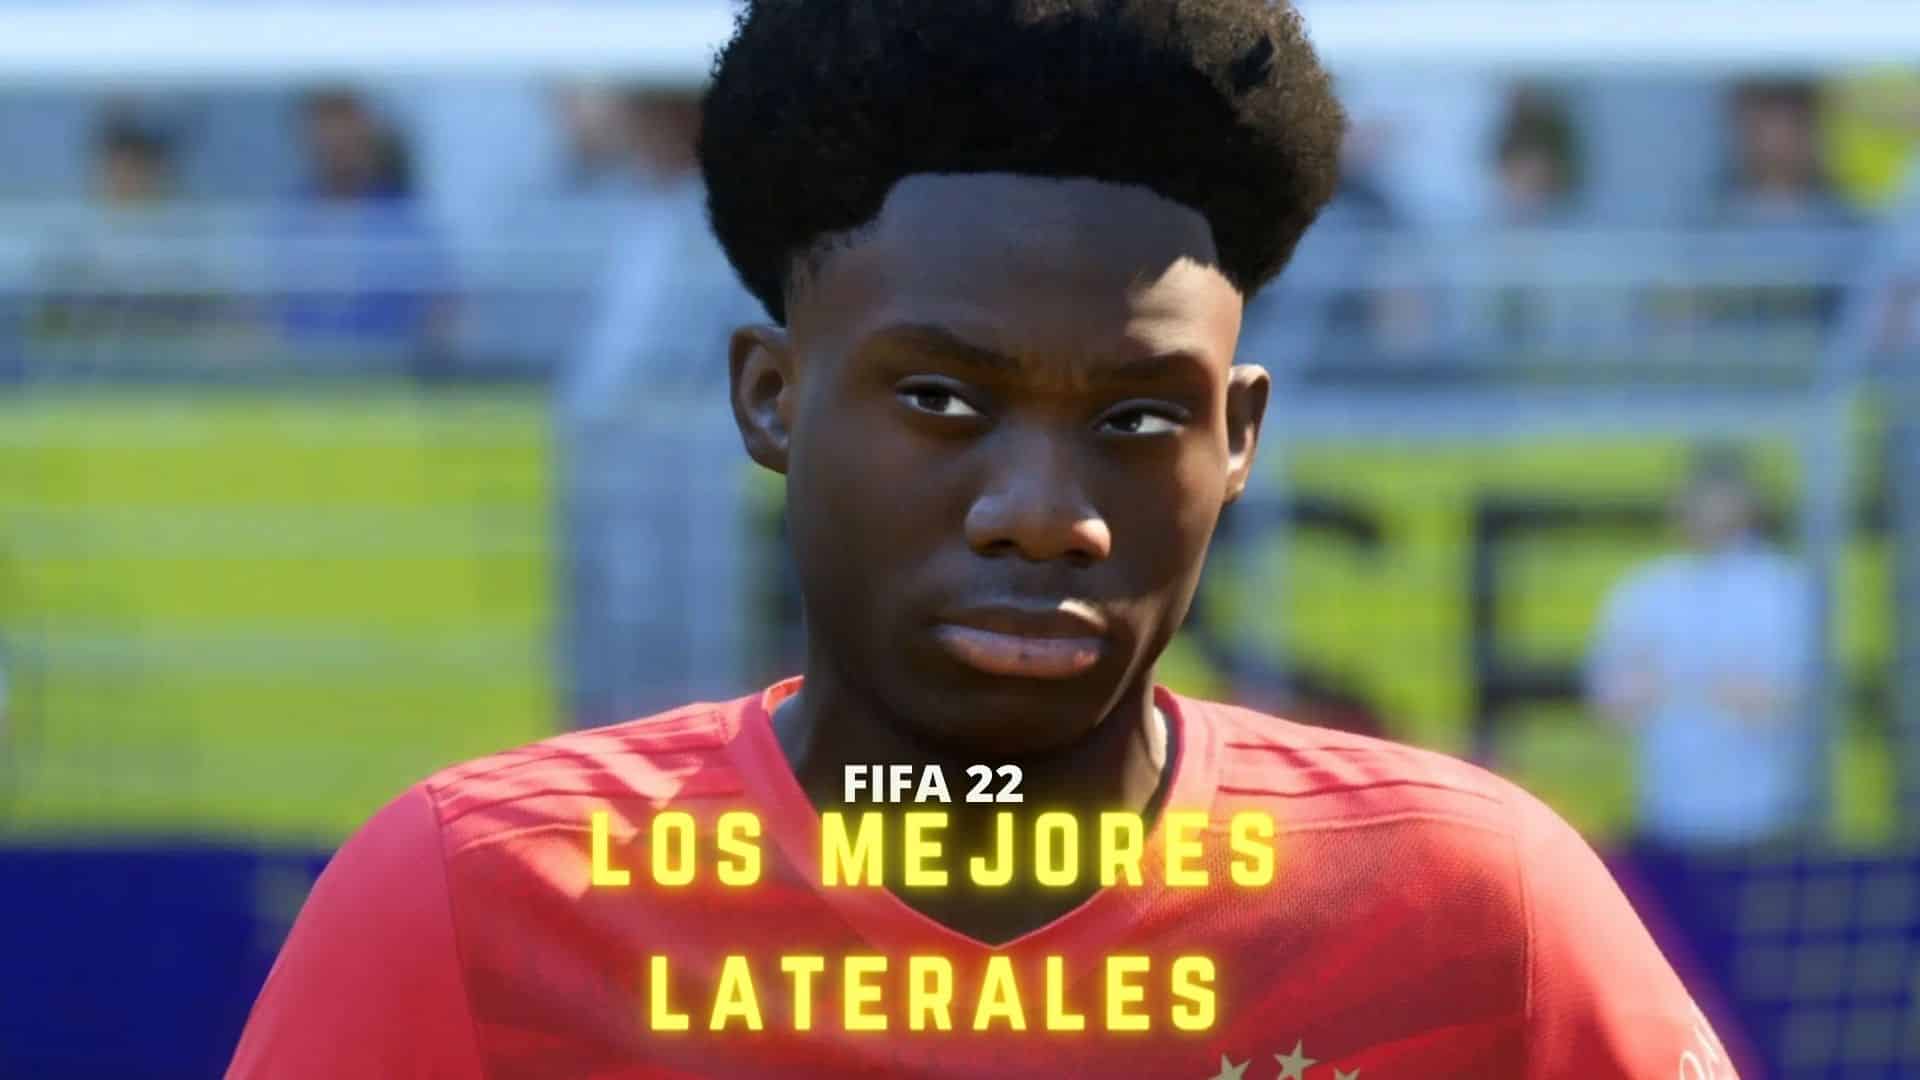 Mejores laterales FIFA 22